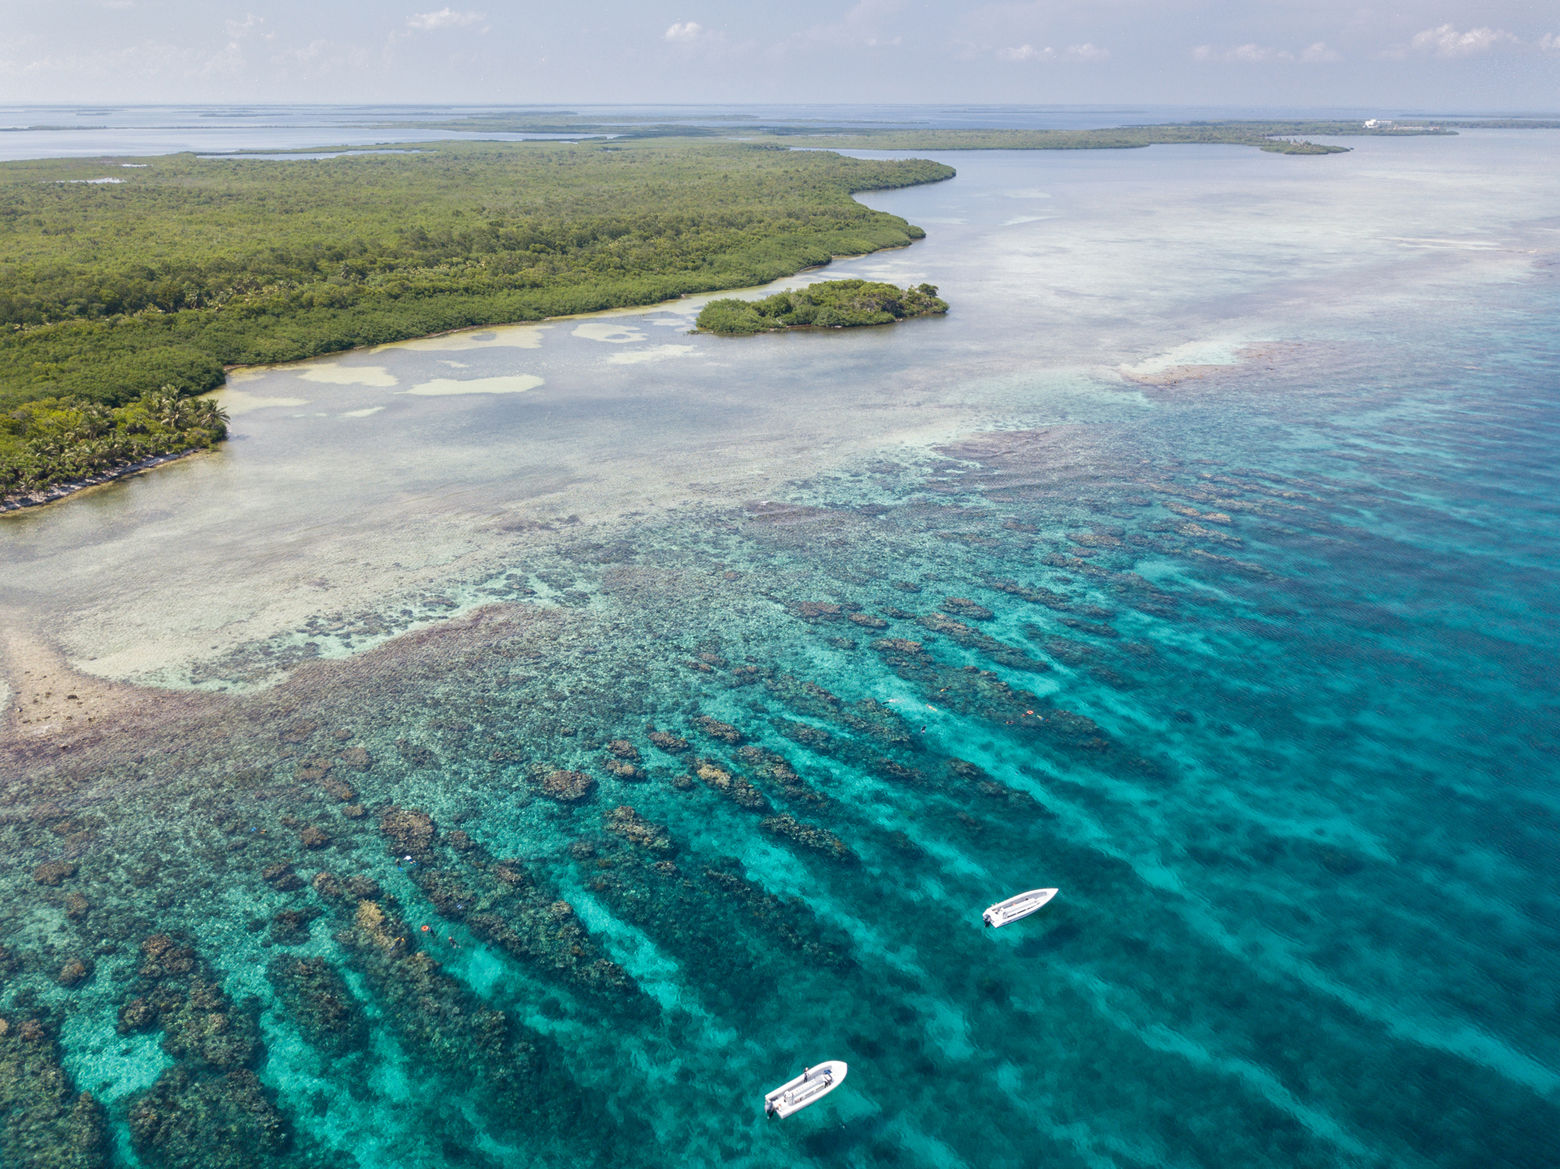 An aerial view of the barrier reef along Turneffe Atoll in Belize reveals spur and groove channels that exist near shore. This type of reef often develops on windward sides of islands.